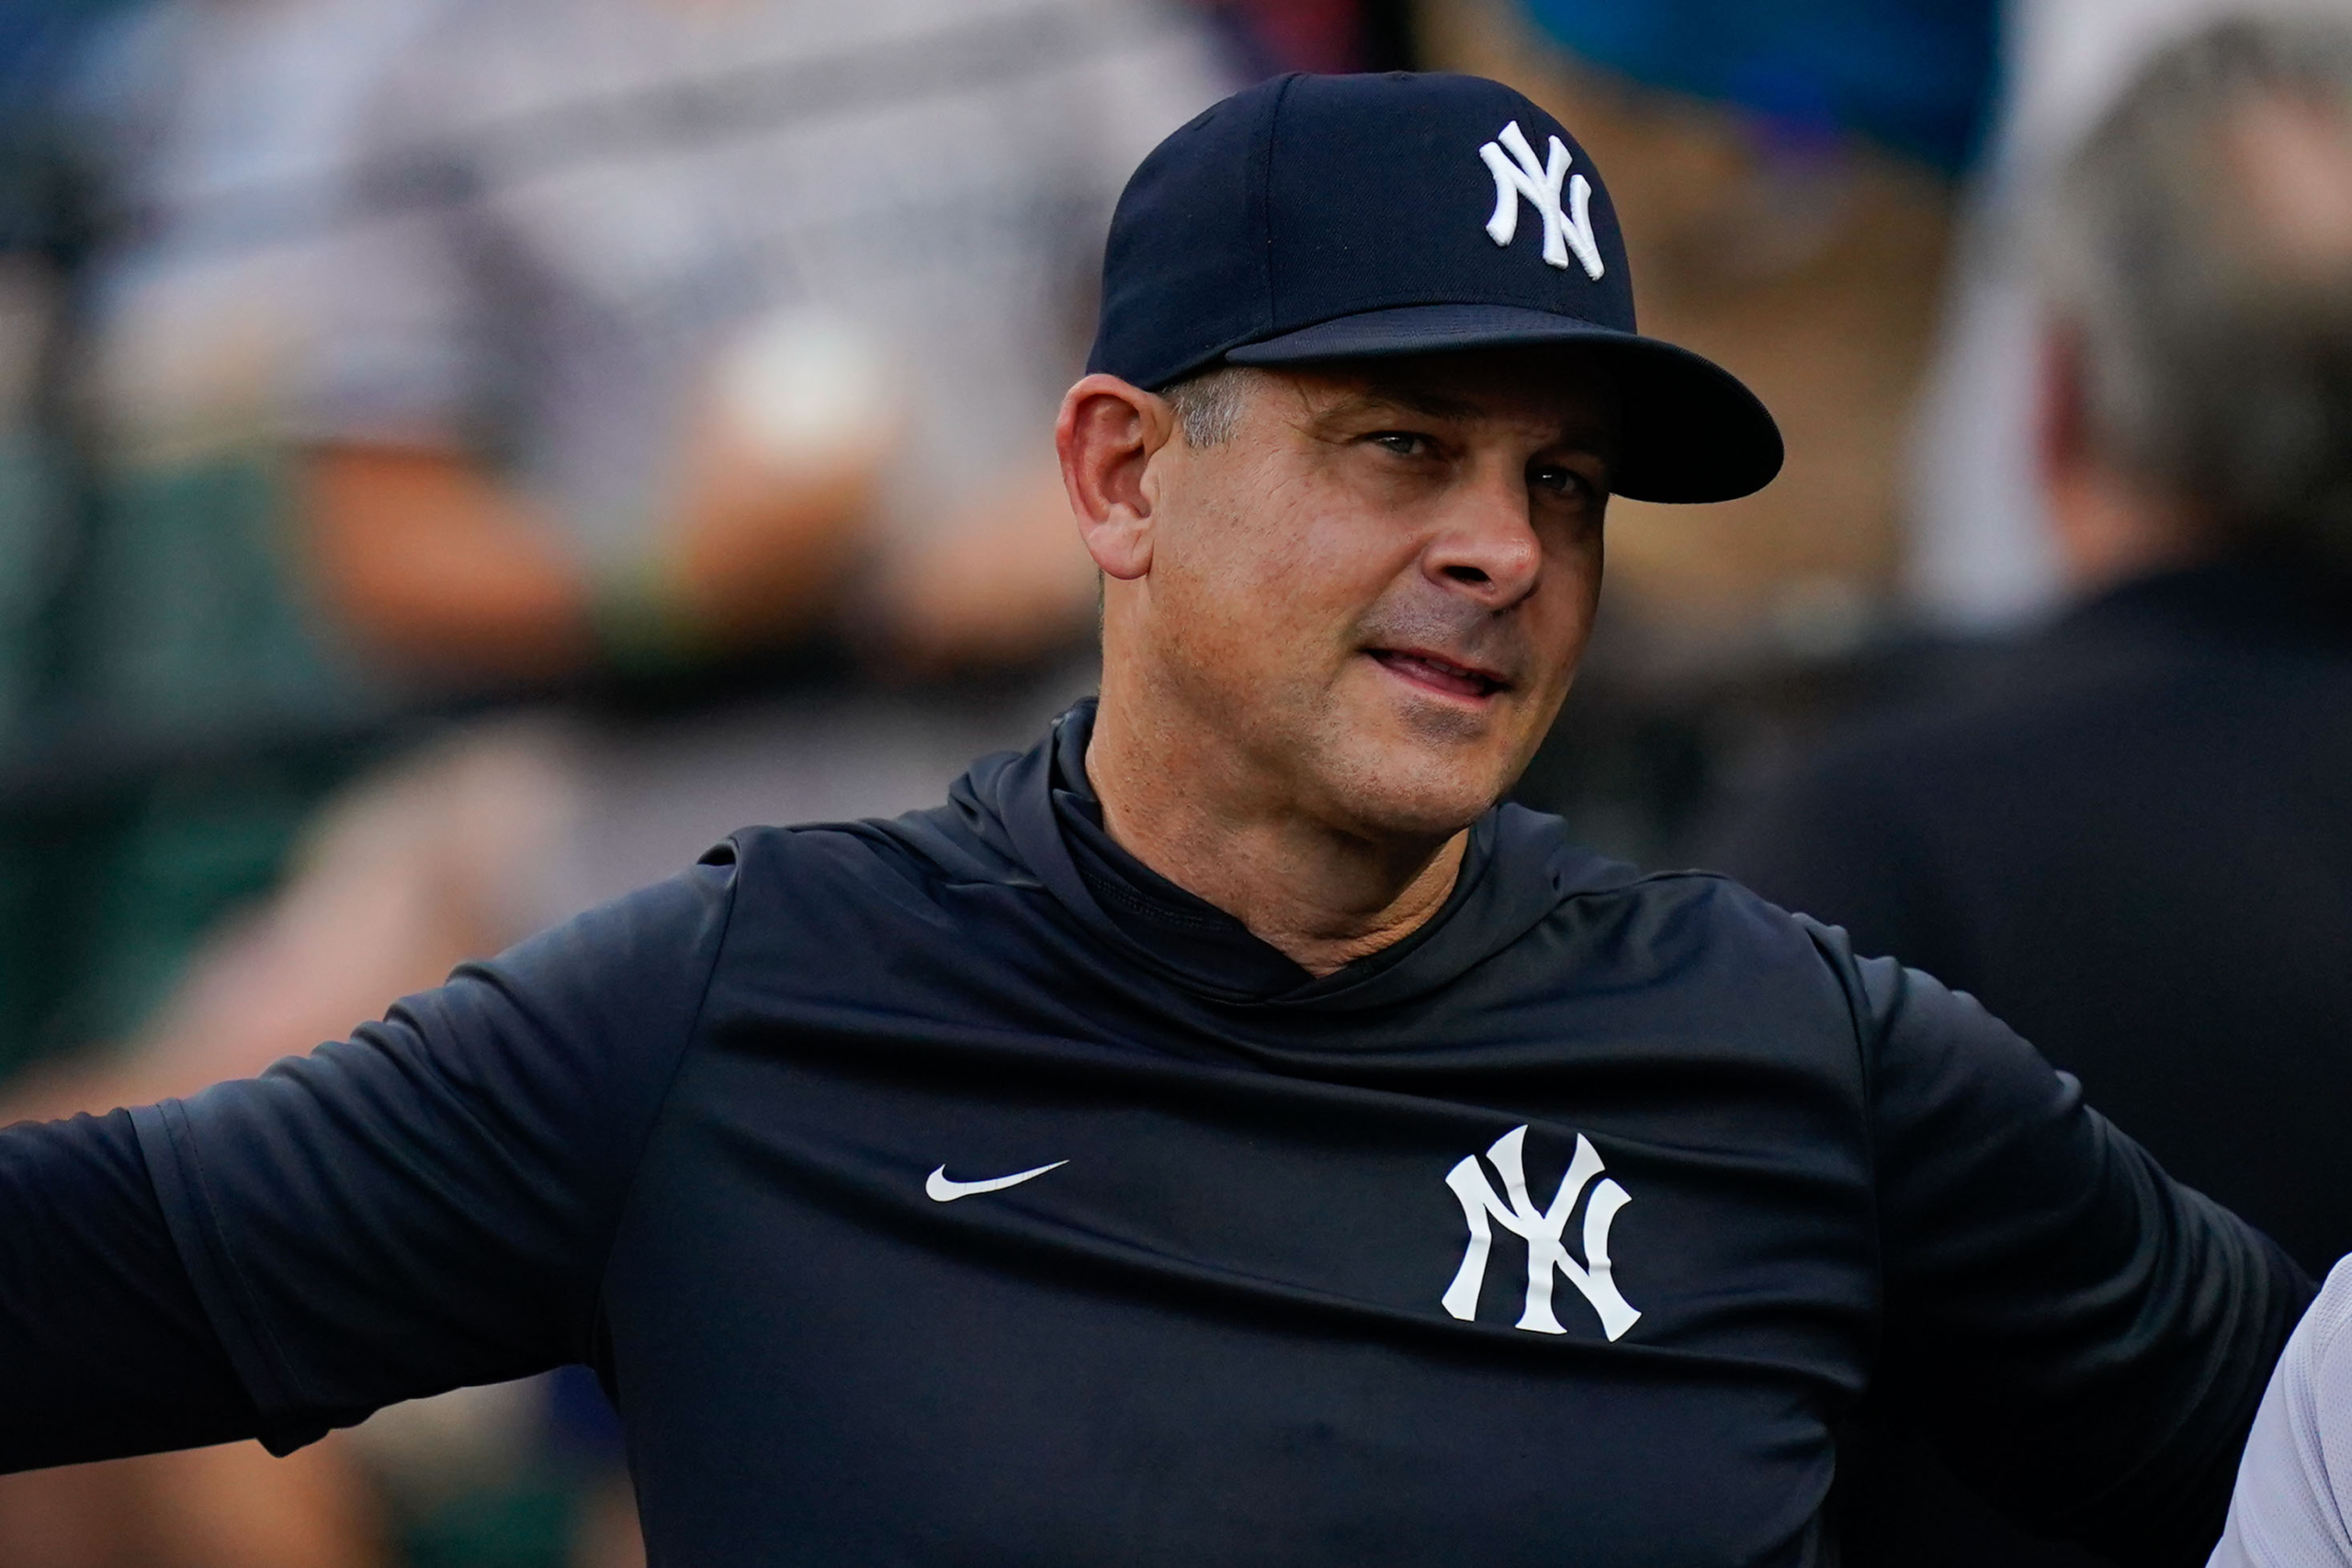 Yankees reportedly tap Boone as new manager - Taipei Times